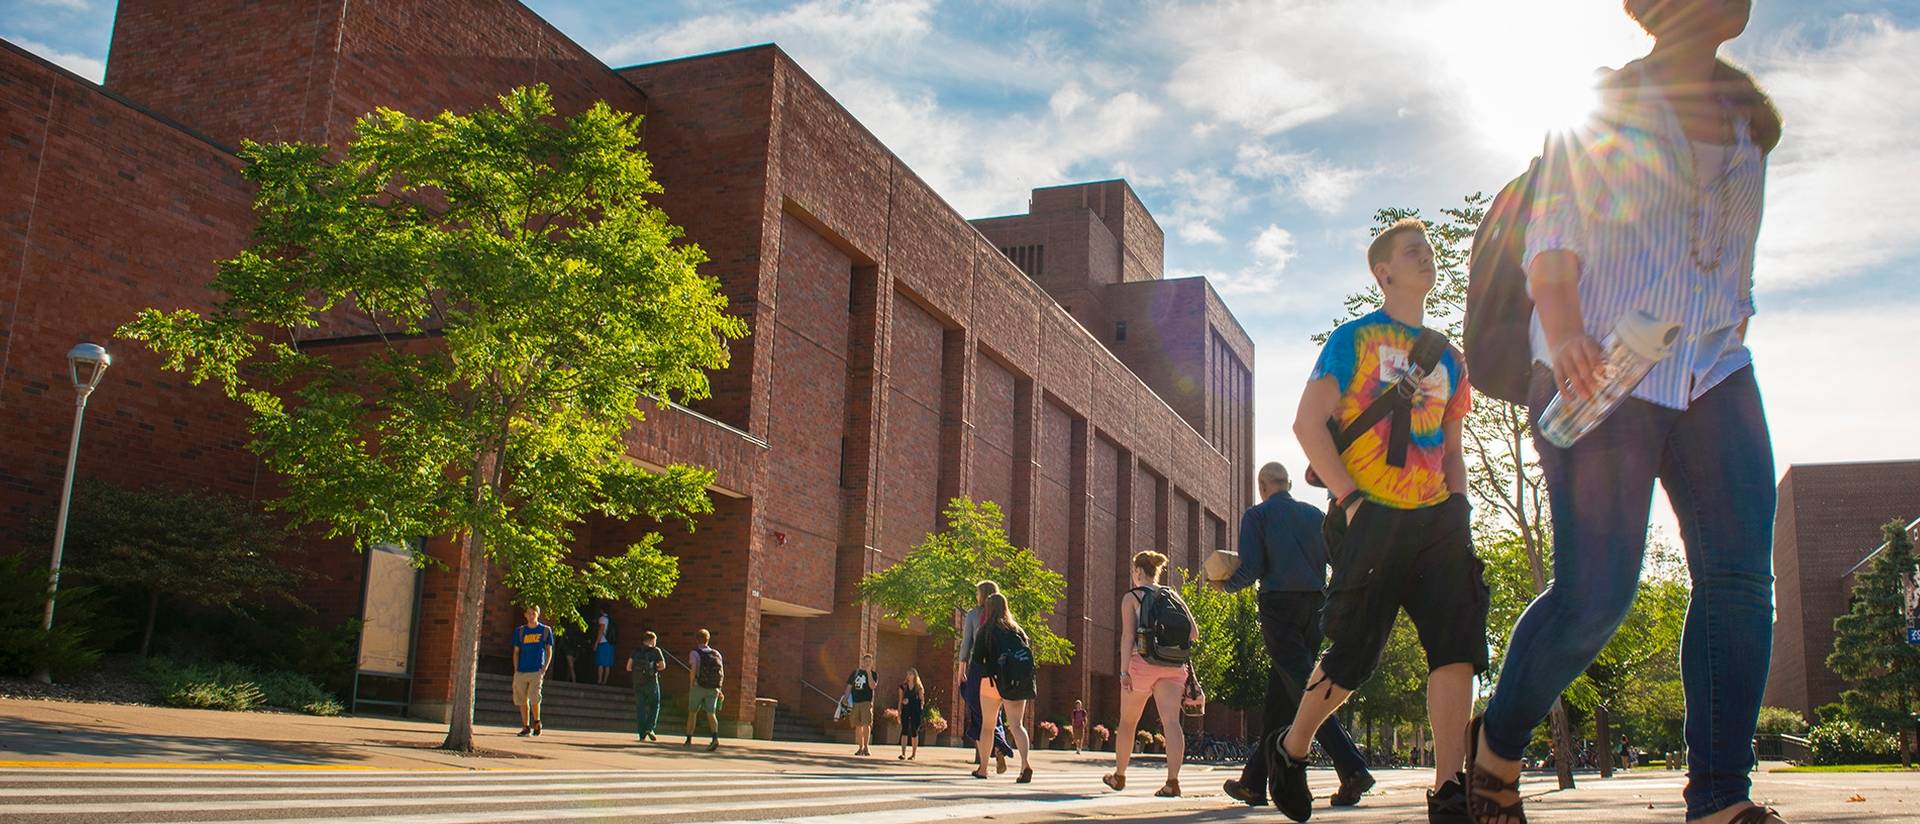 Students walking on campus on a summer day